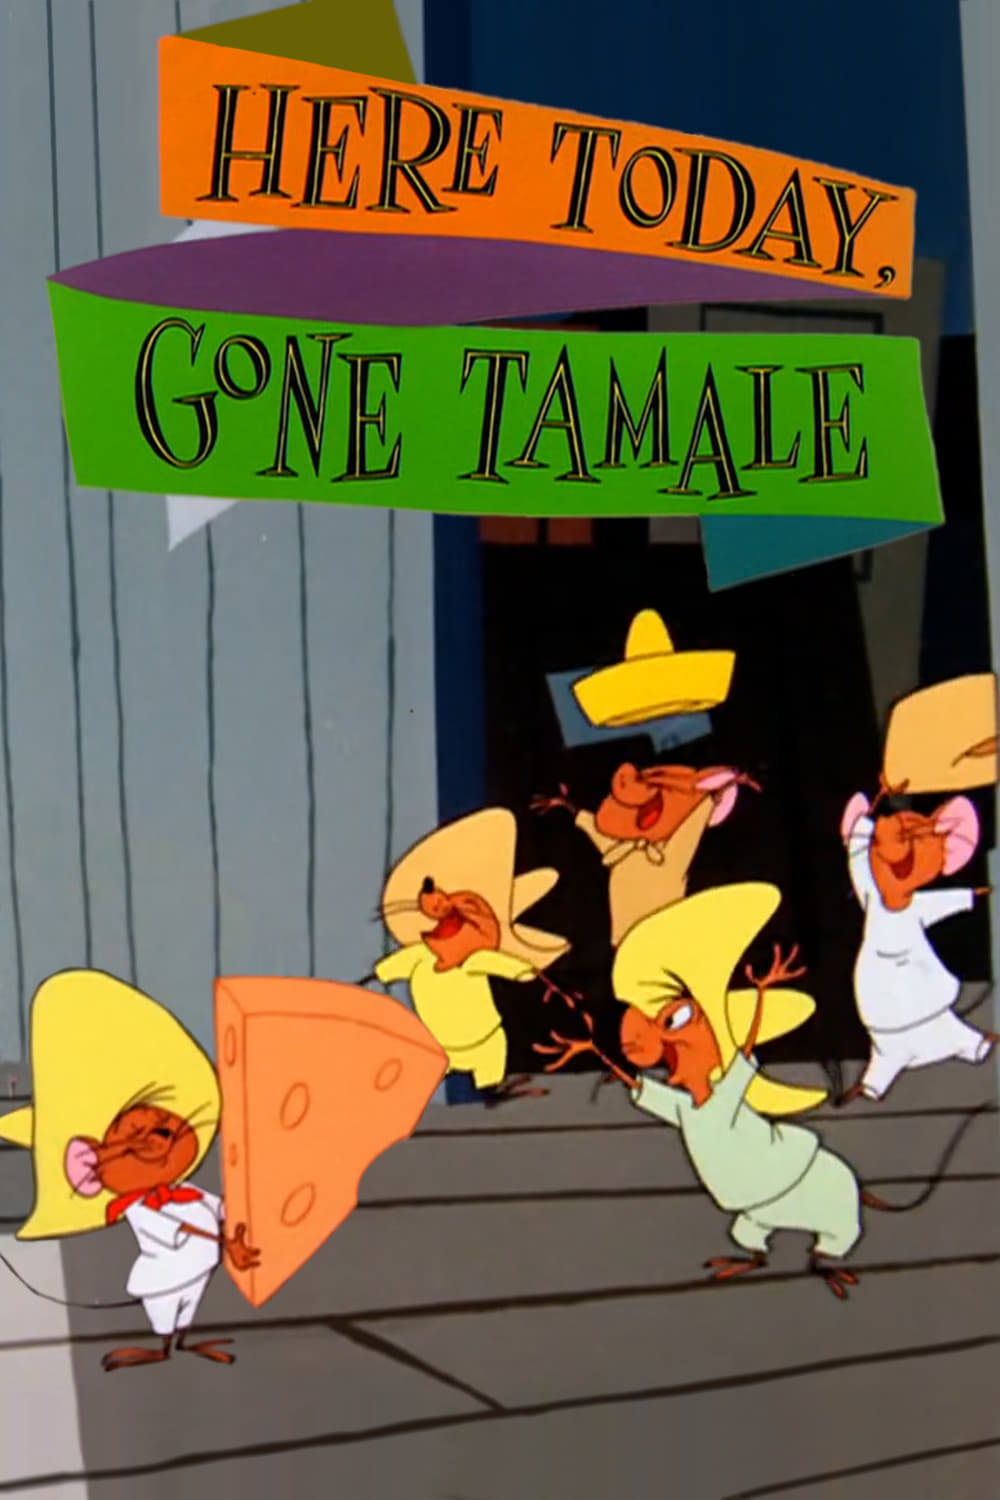 Here Today, Gone Tamale (1959)